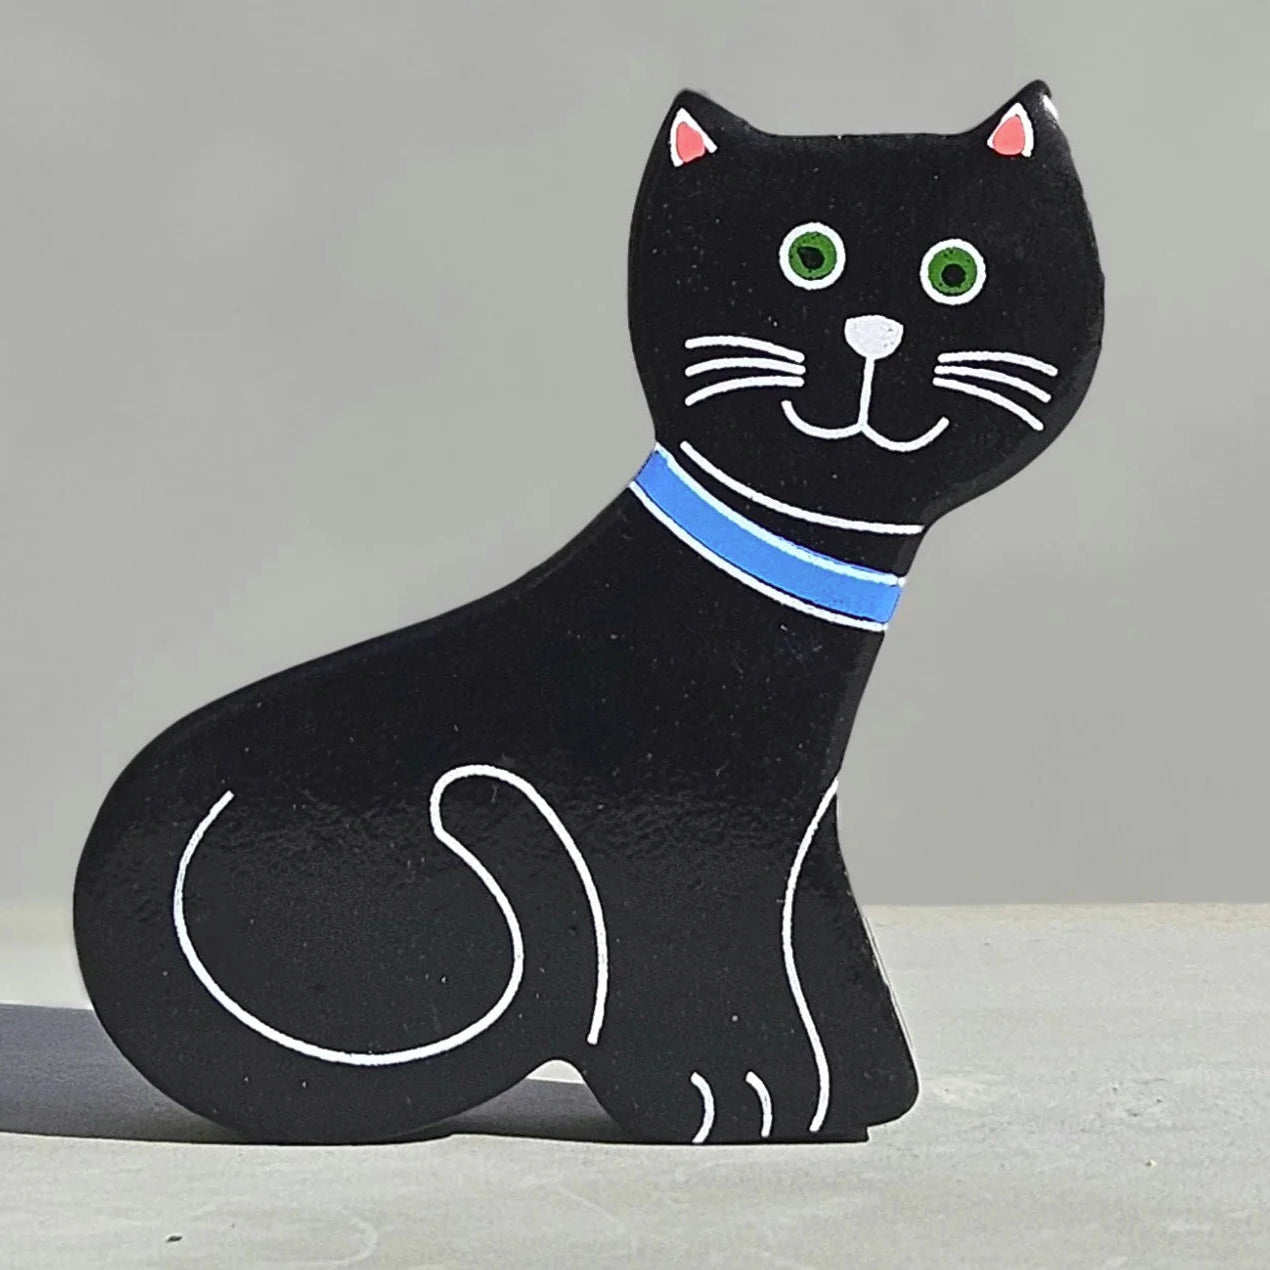 A magnetic wooden cat play figure with a blue collar.